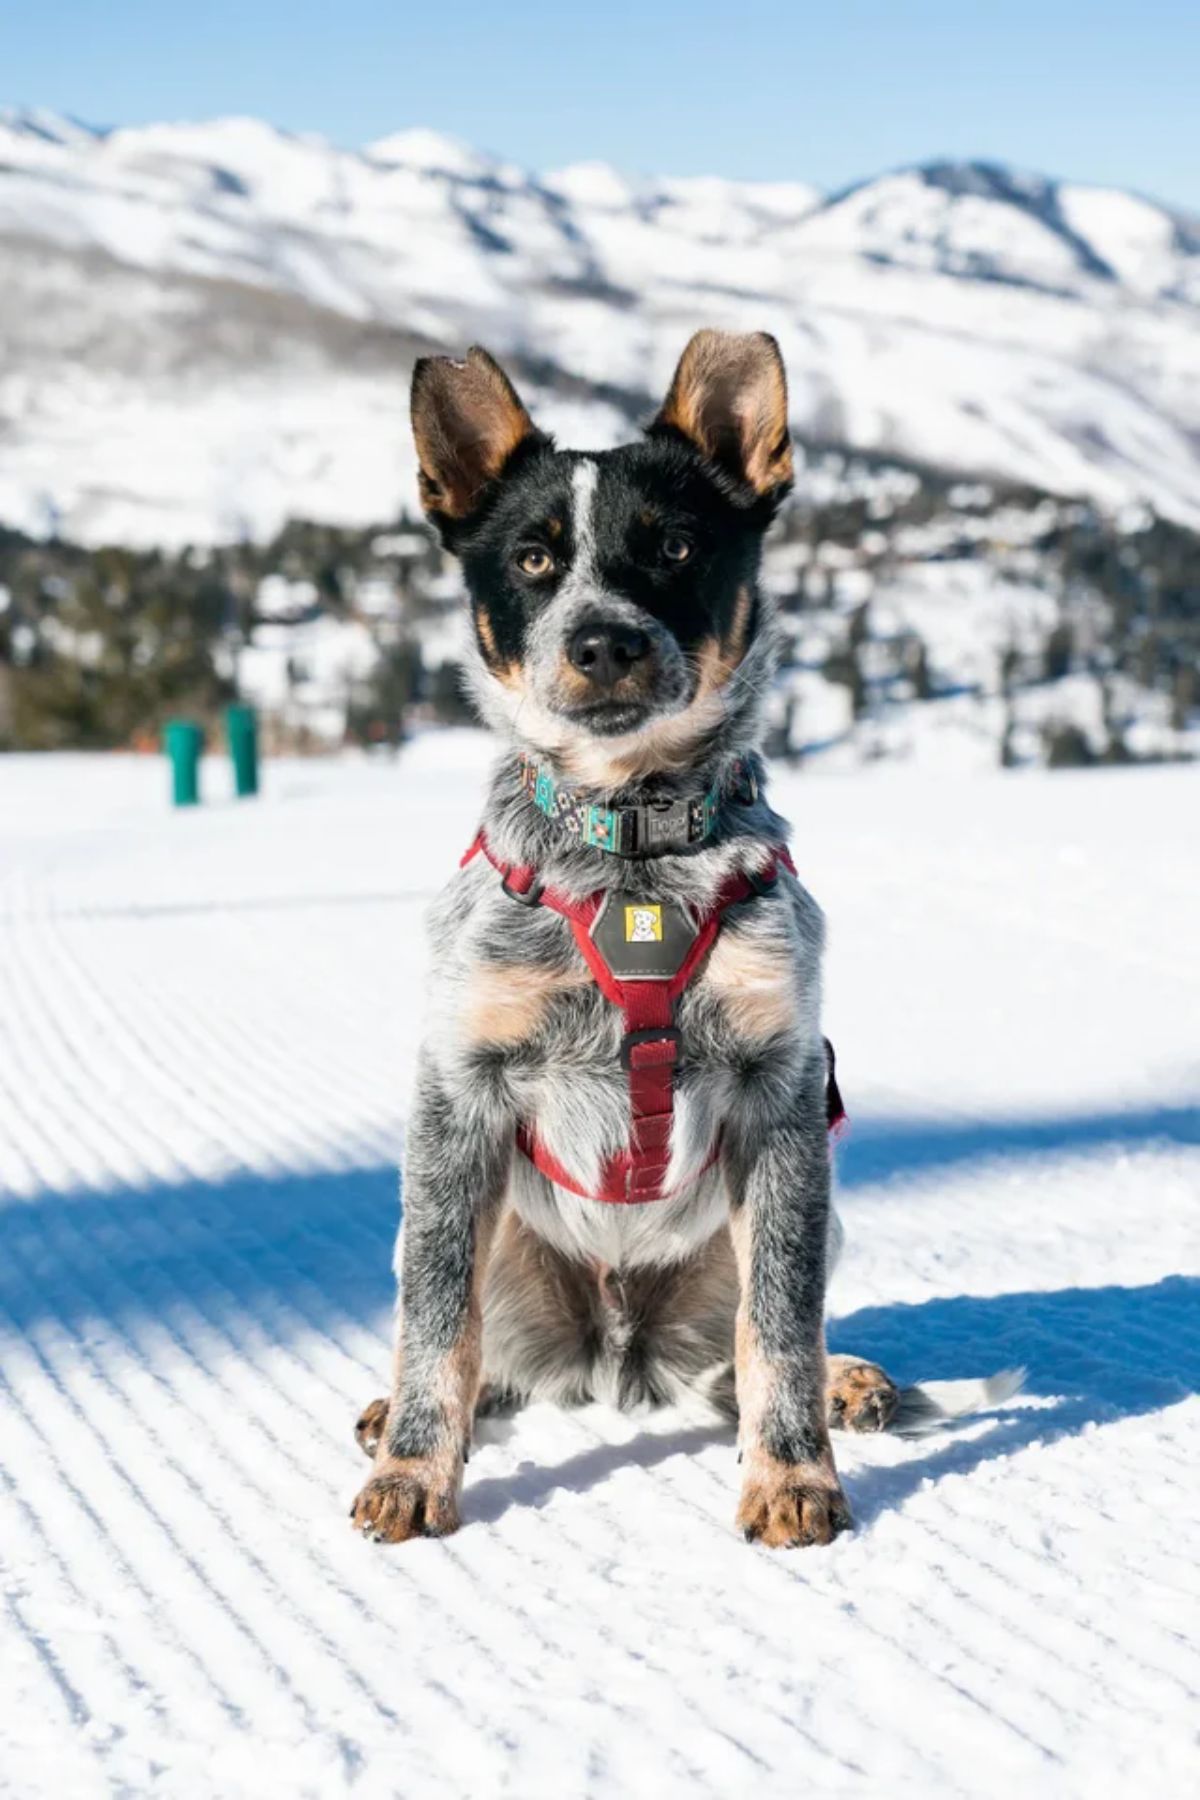 black white and brown dog in a red harness sitting on snow